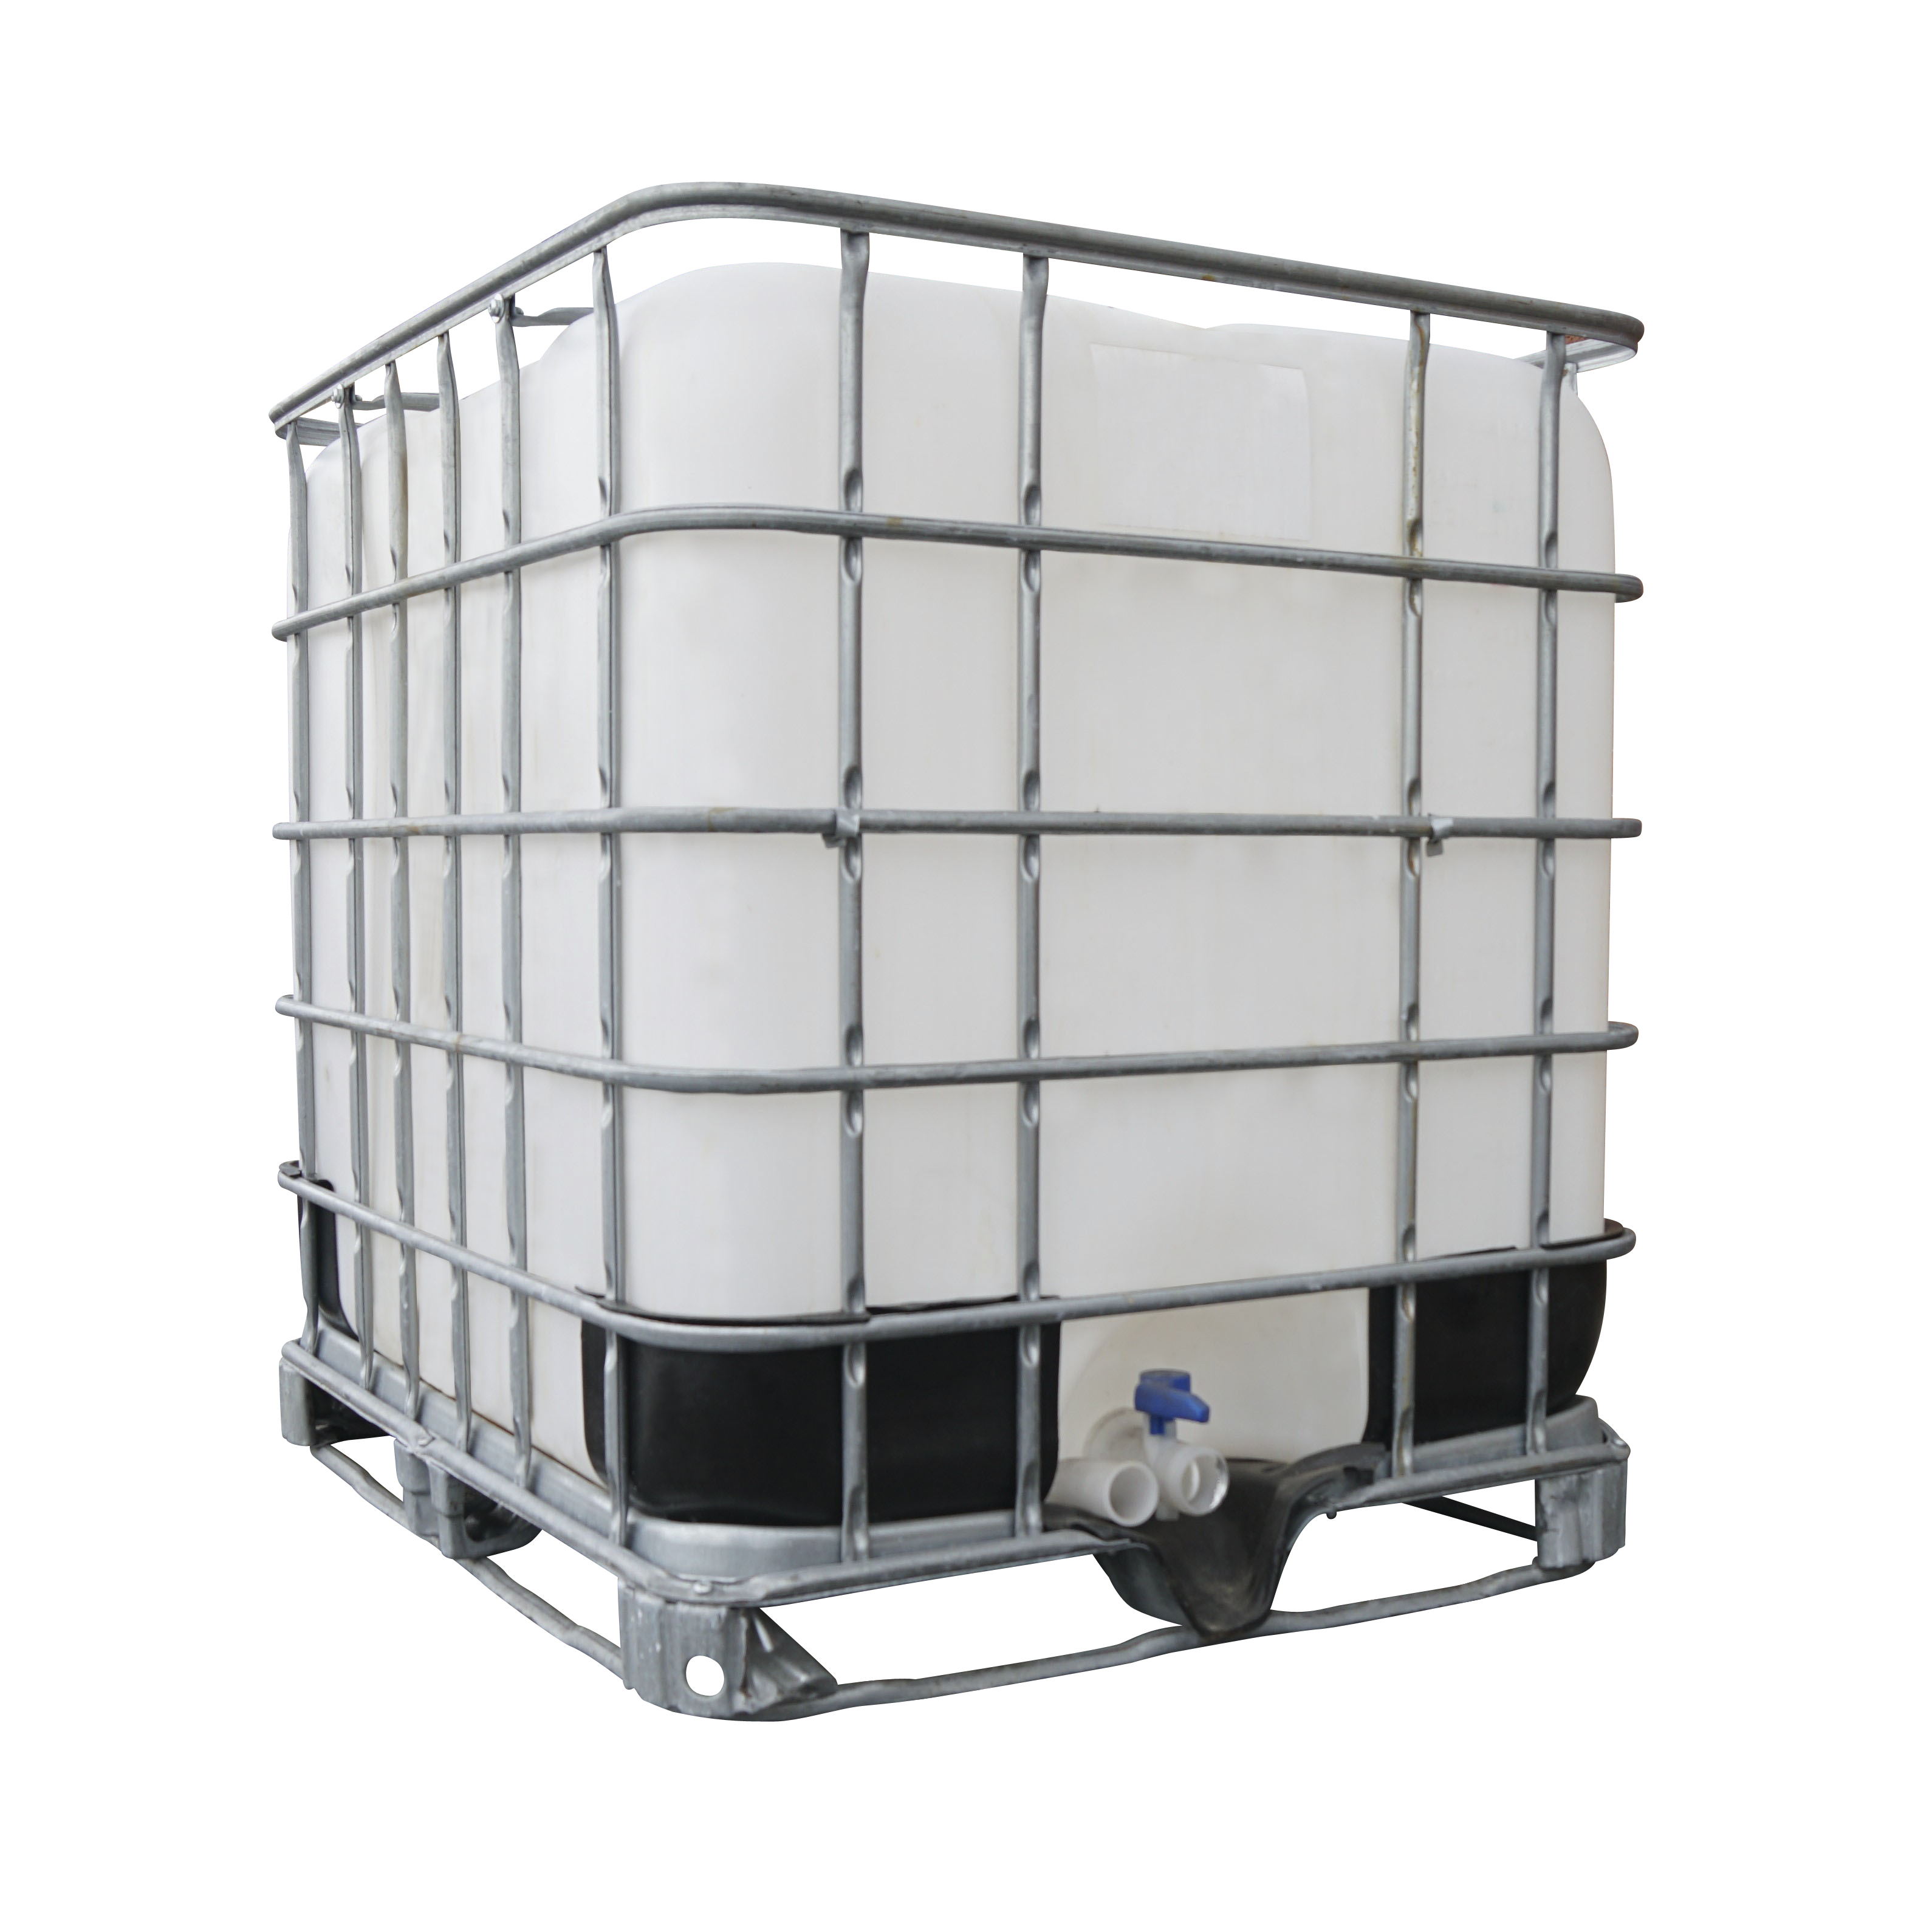 1000 Litre IBC Container with Tap and Frame to enable Forktruck Transportation (Reconditioned)